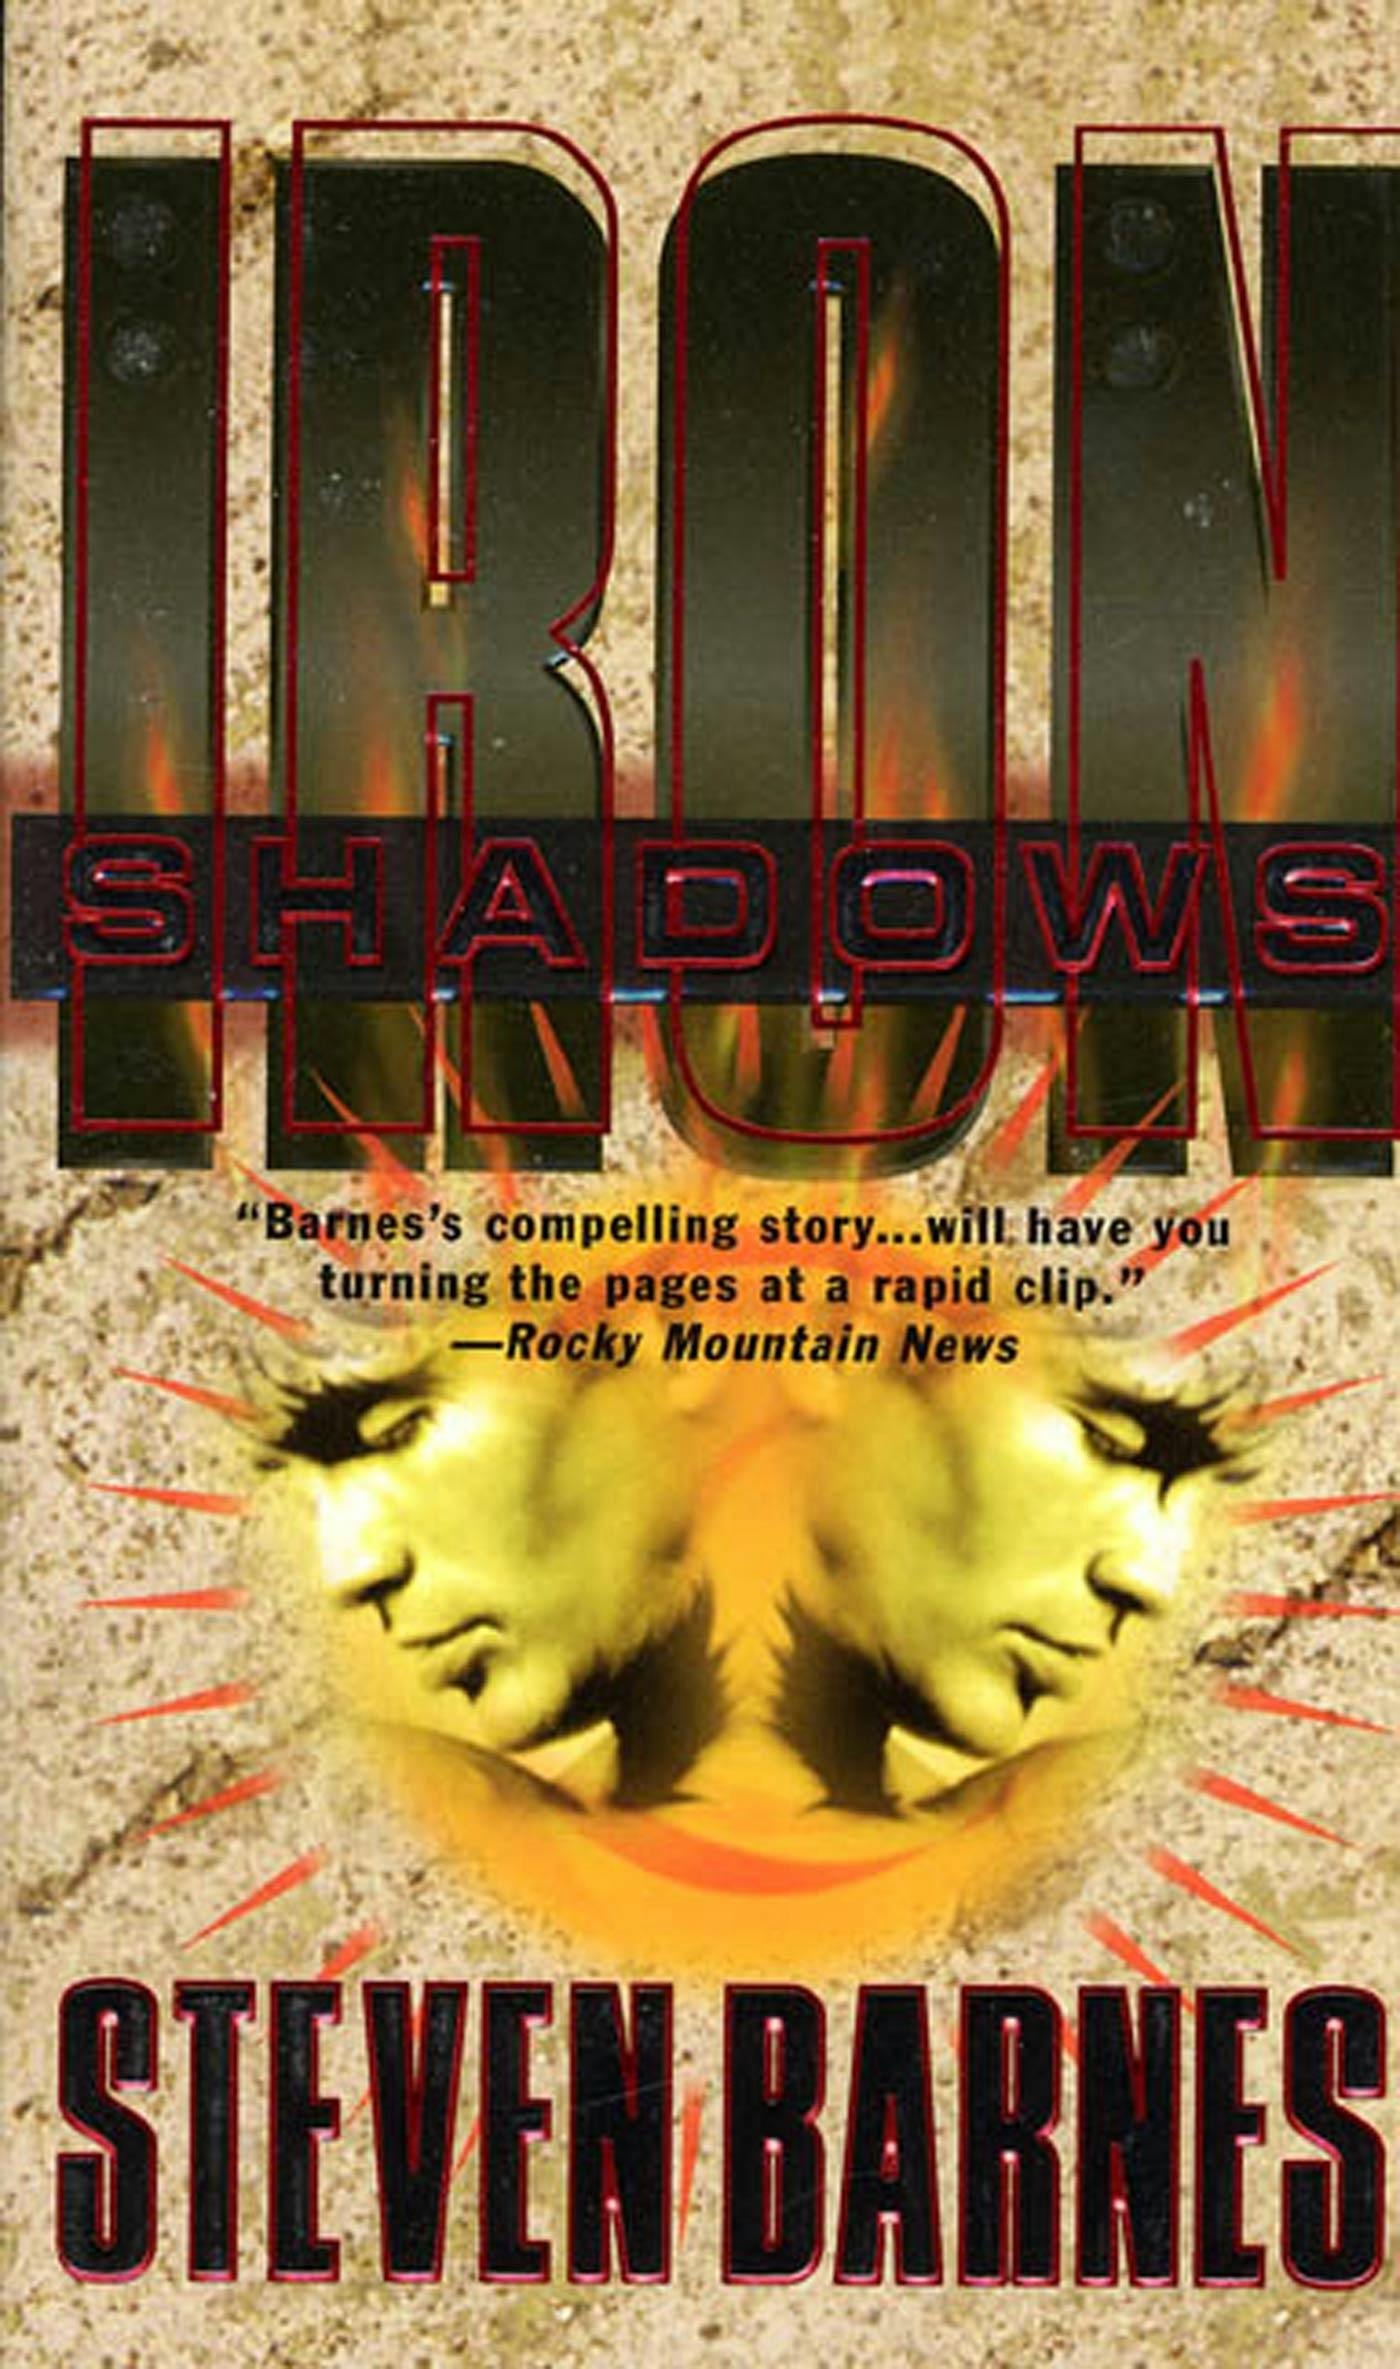 Cover for the book titled as: Iron Shadows